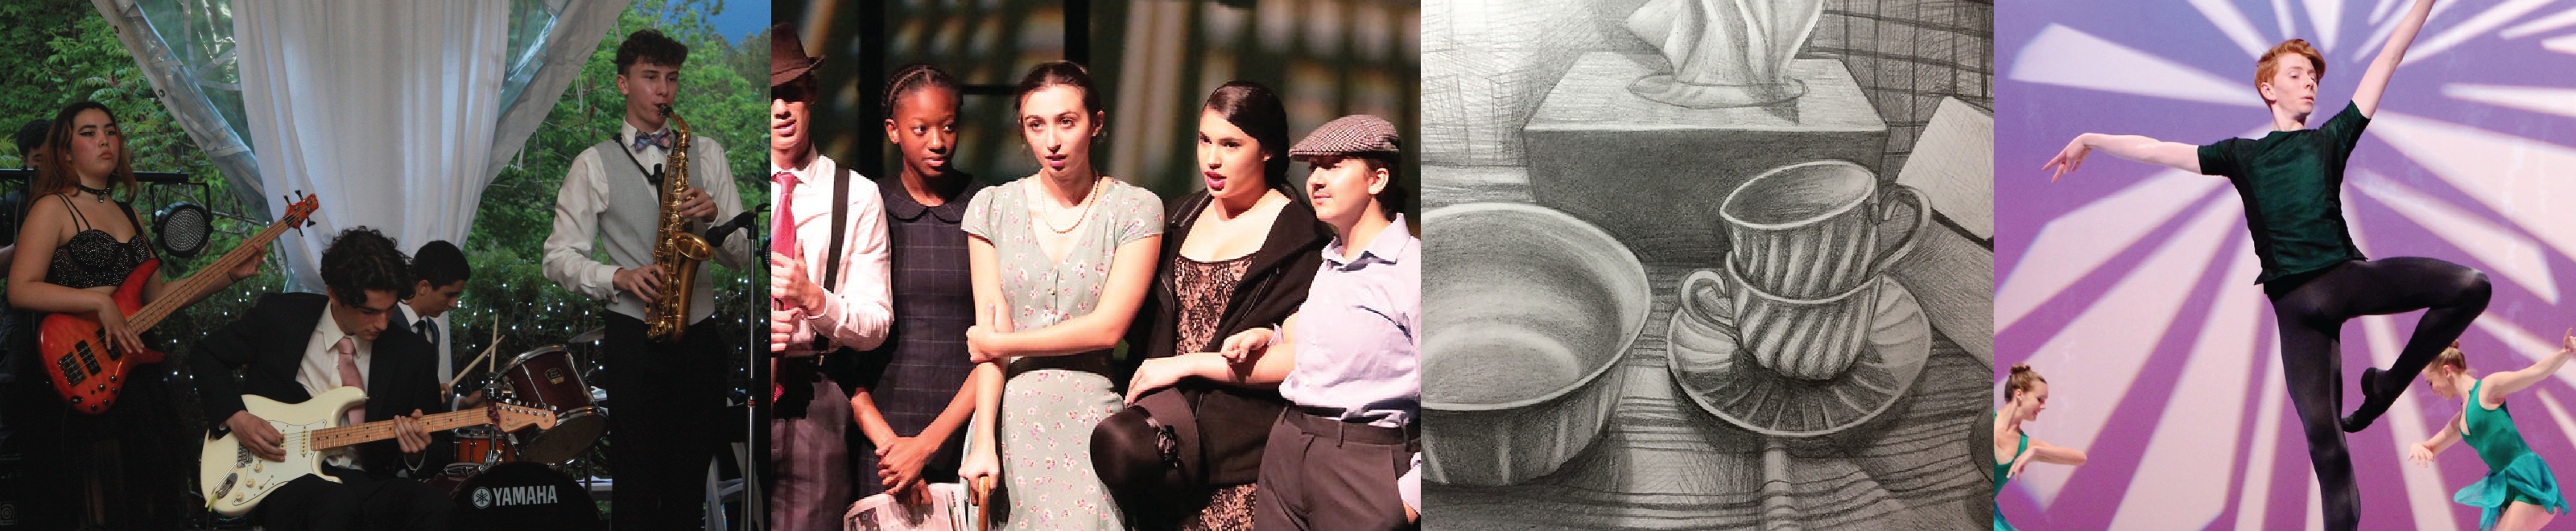 First image consists of a group of students playing band on stage. Second image is a group of drama students acting. Third image is an drawing of a 2 cups and a bowl. Forth image is a male student dancing on stage. 